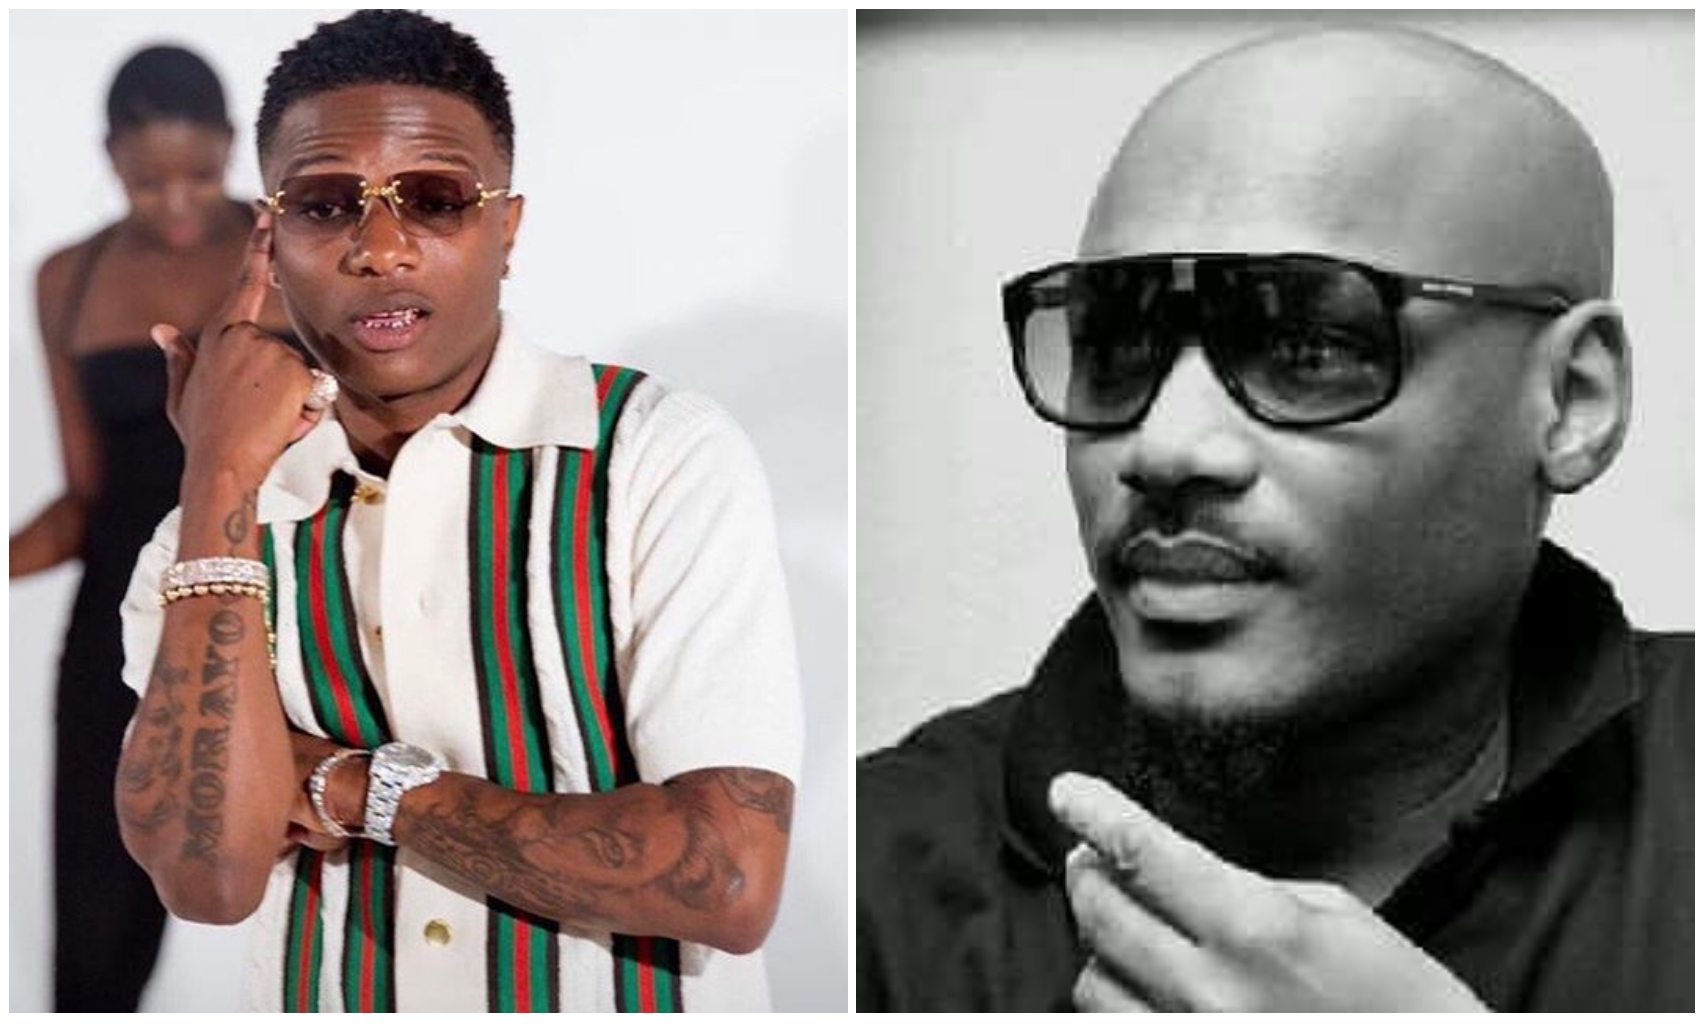 2Face Idibia set to release new single 'Opo' featuring Star Boy Wizkid (Photo)